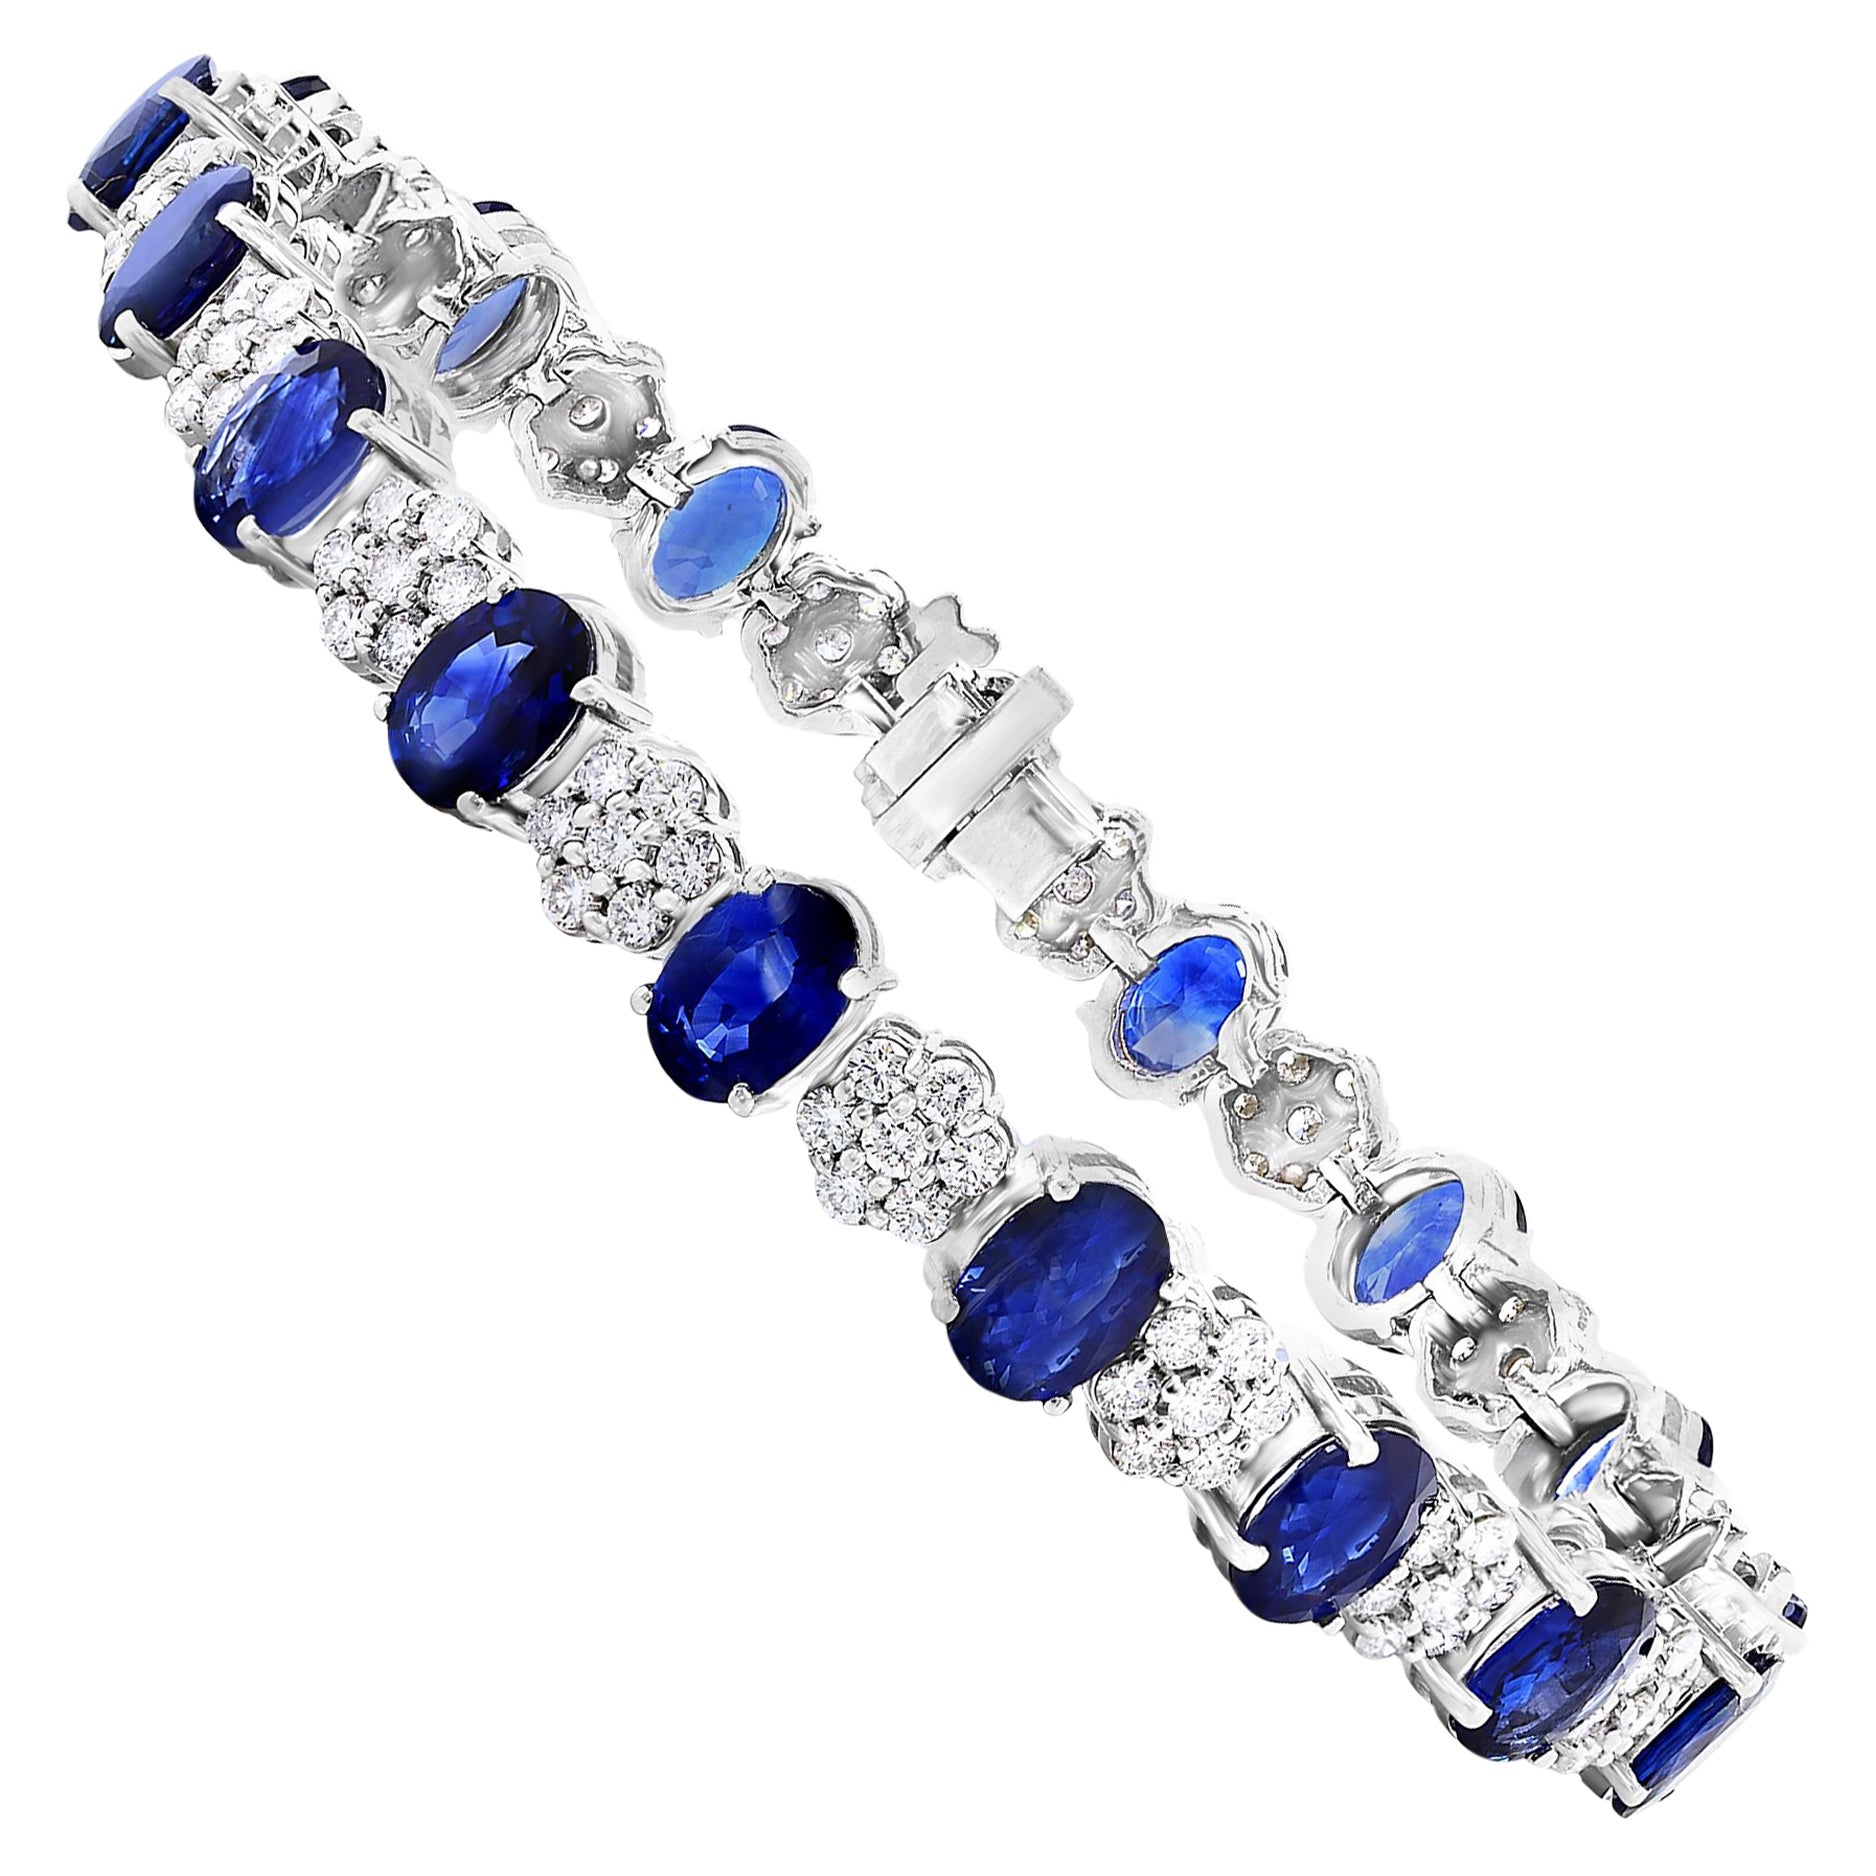 15.26 Carat Oval Cut Blue Sapphire and Diamond Tennis Bracelet in 14K White Gold For Sale